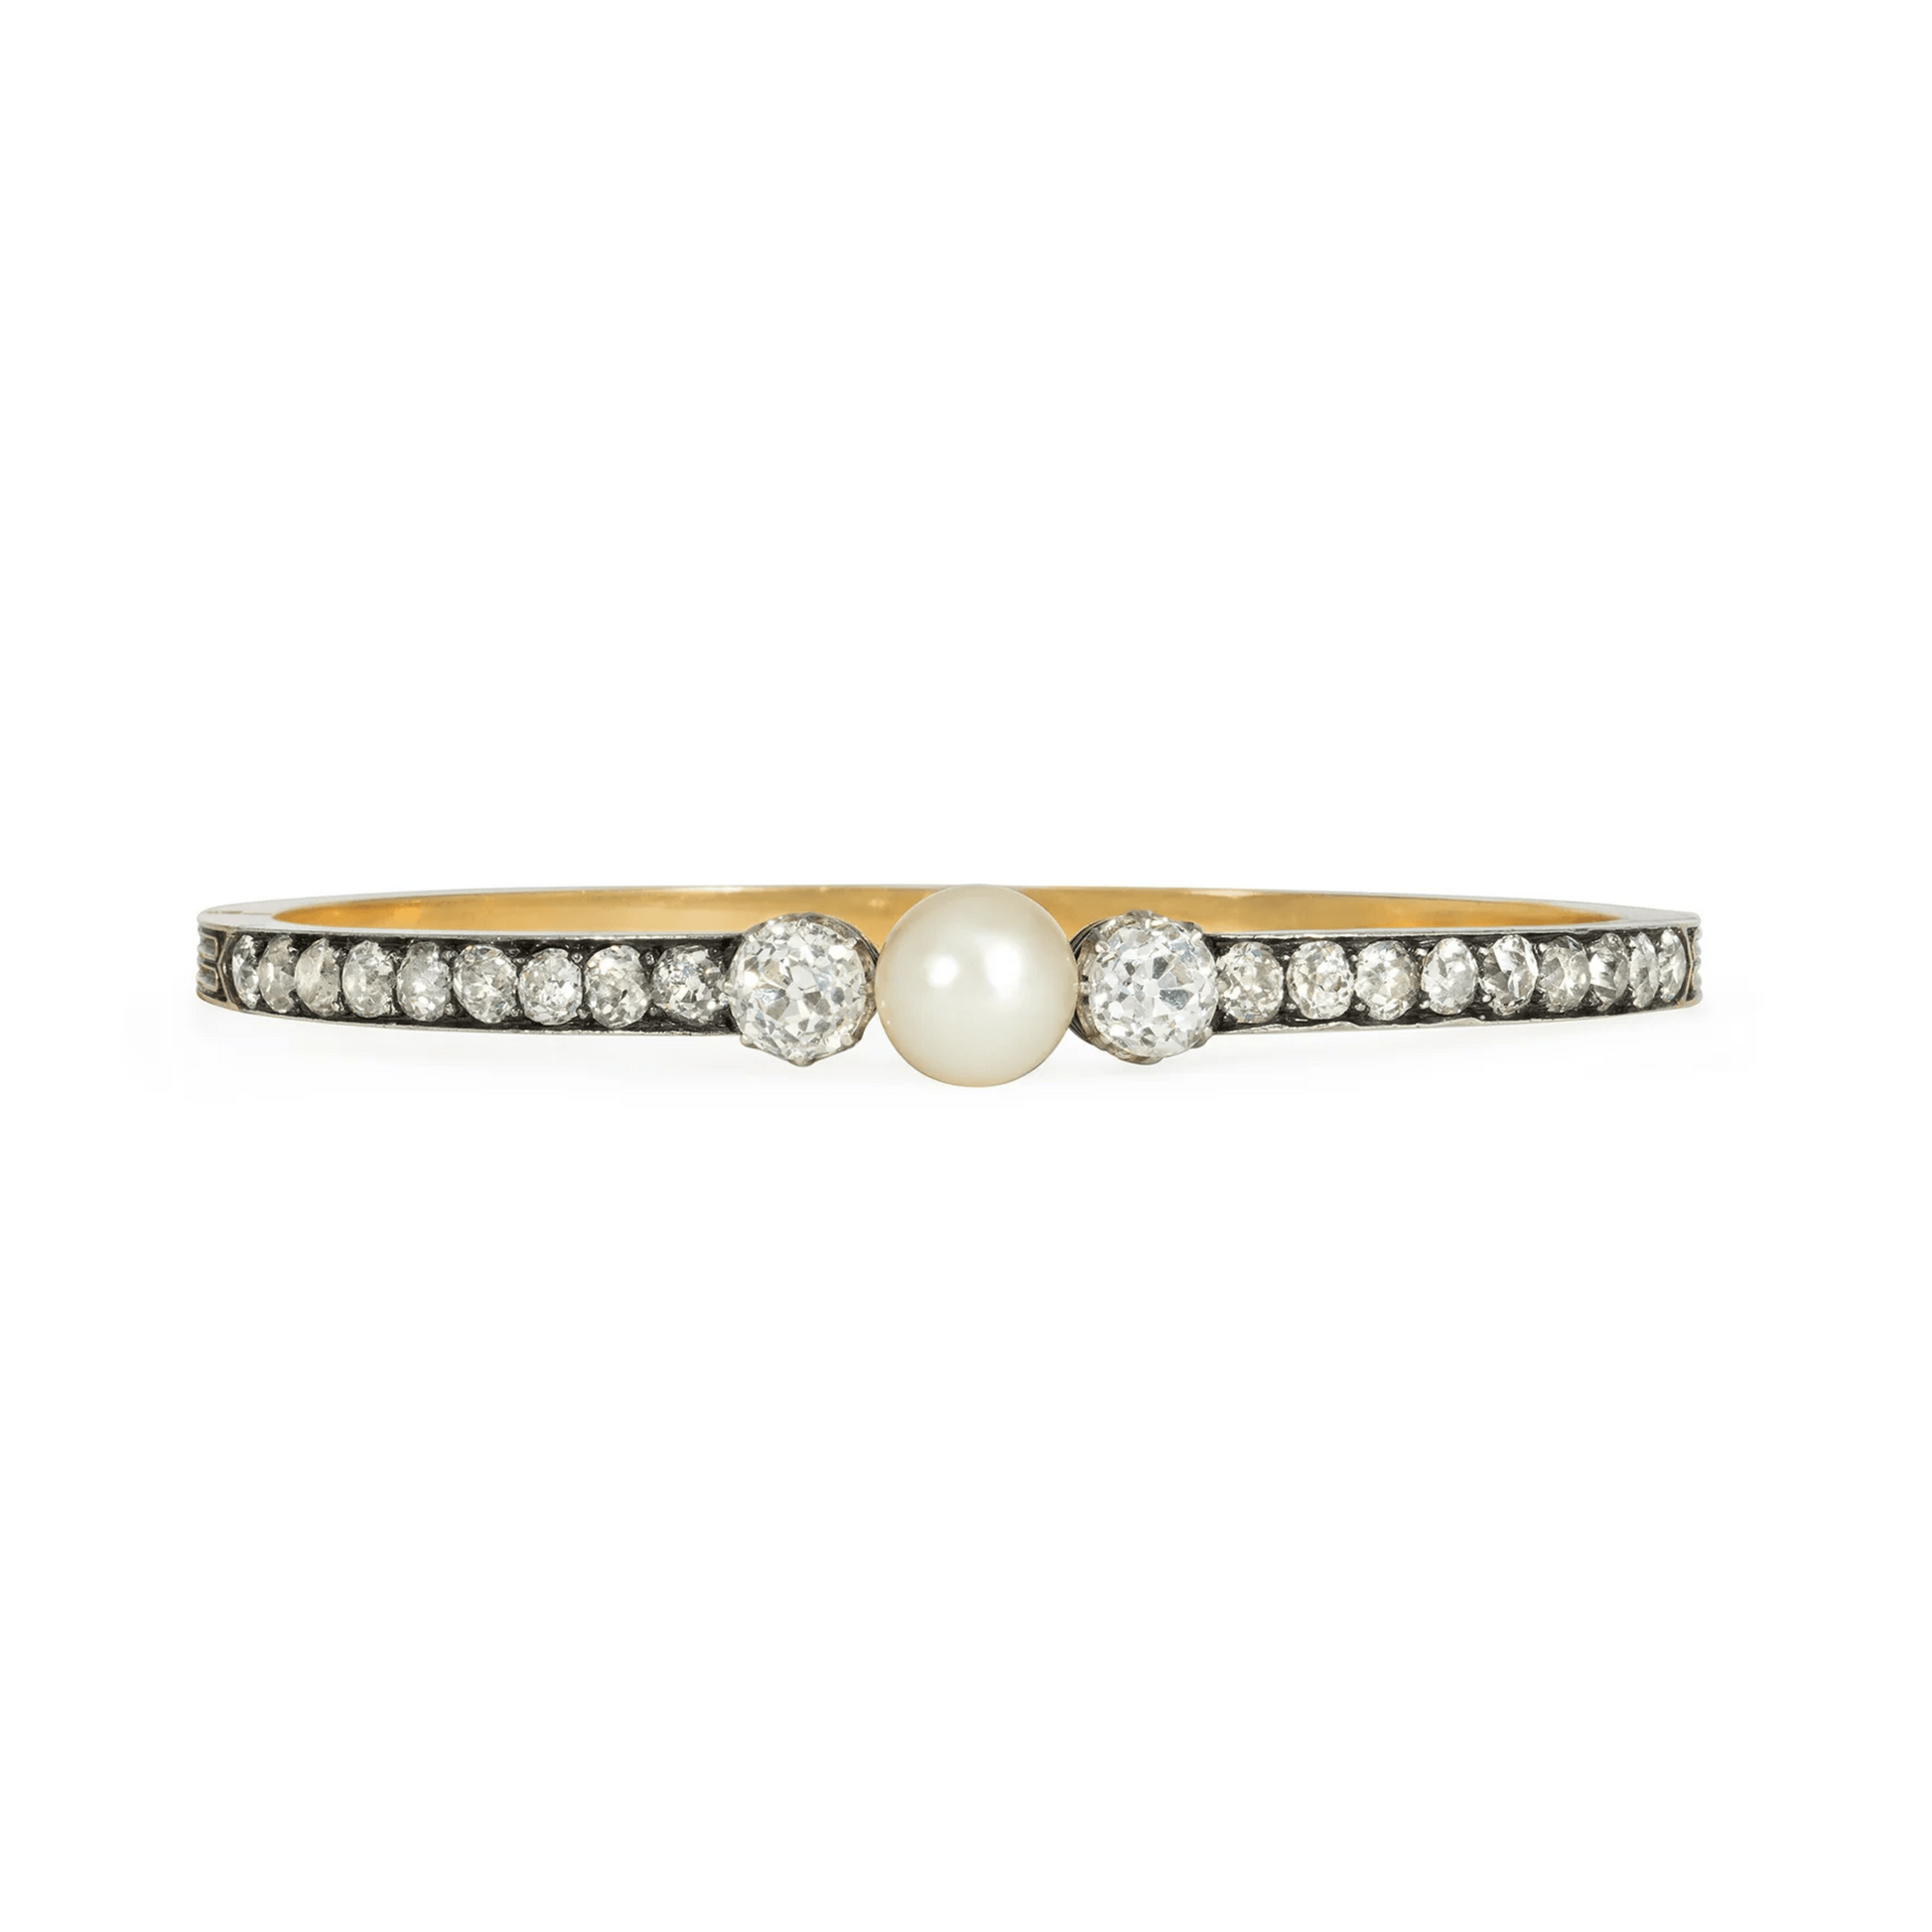 French Antique Silver & 18KT Yellow Gold Diamond & Natural Pearl Bangle Bracelet front